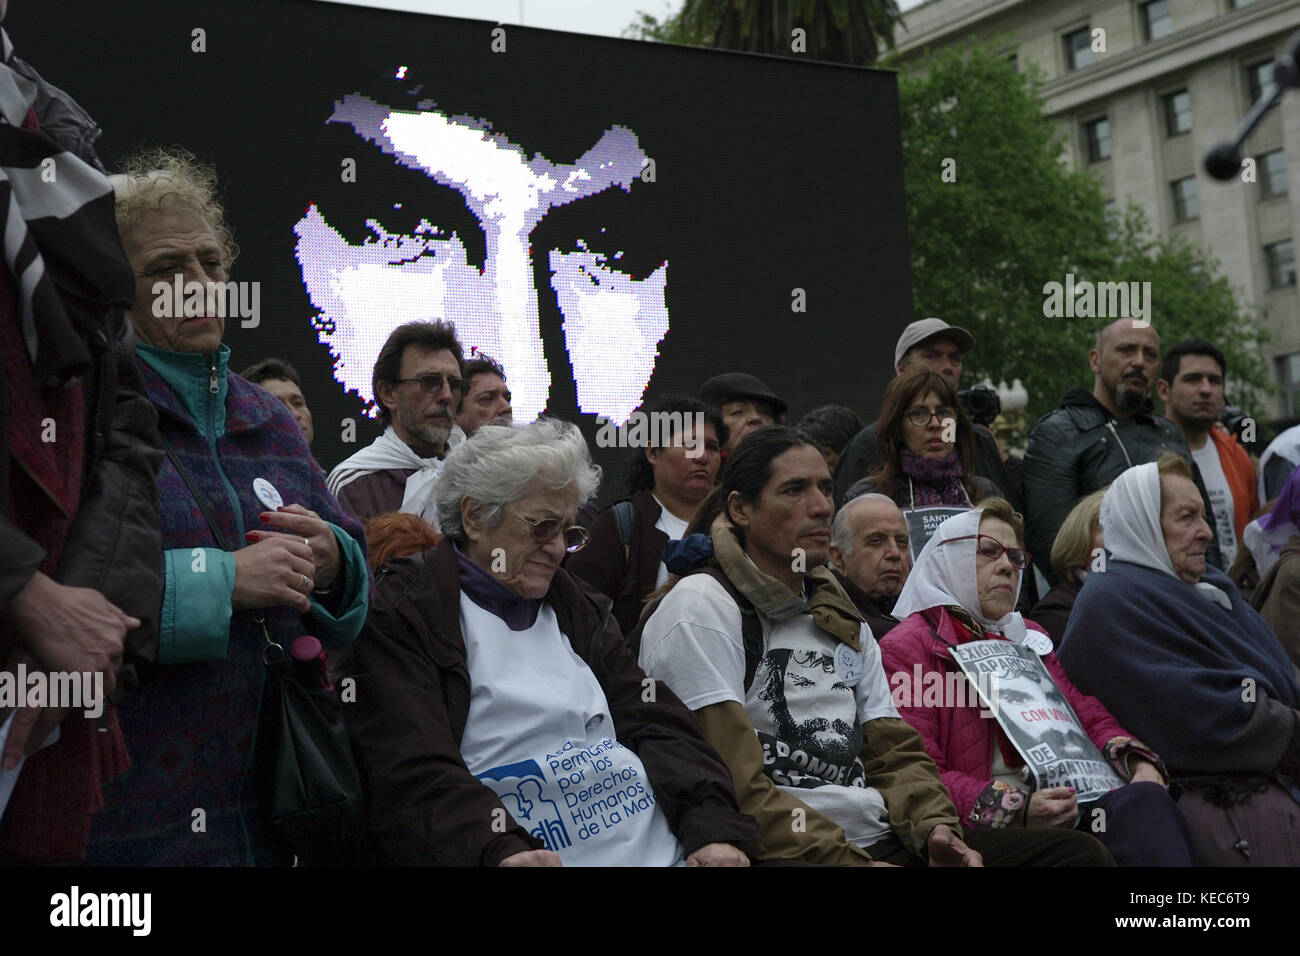 Federal Capital, Buenos Aires, Argentina. 30th Sep, 2017. The family of Santiago Maldonado is seen during a protest against the disappearance of Santiago Maldonado since 1 August 2017.Despite the rain, thousands of protesters gathered on Sunday in Plaza de Mayo hosted by the relatives and friends of Santiago Maldonado two months after his disappearance, after he was reportedly surrendering to Argentinian police guards during a raid on a camp of Mapuche protesters in Patagonia, south of Argentina. Various protests were seen in several other cities in Argentina, and abroad such as London, Stock Photo